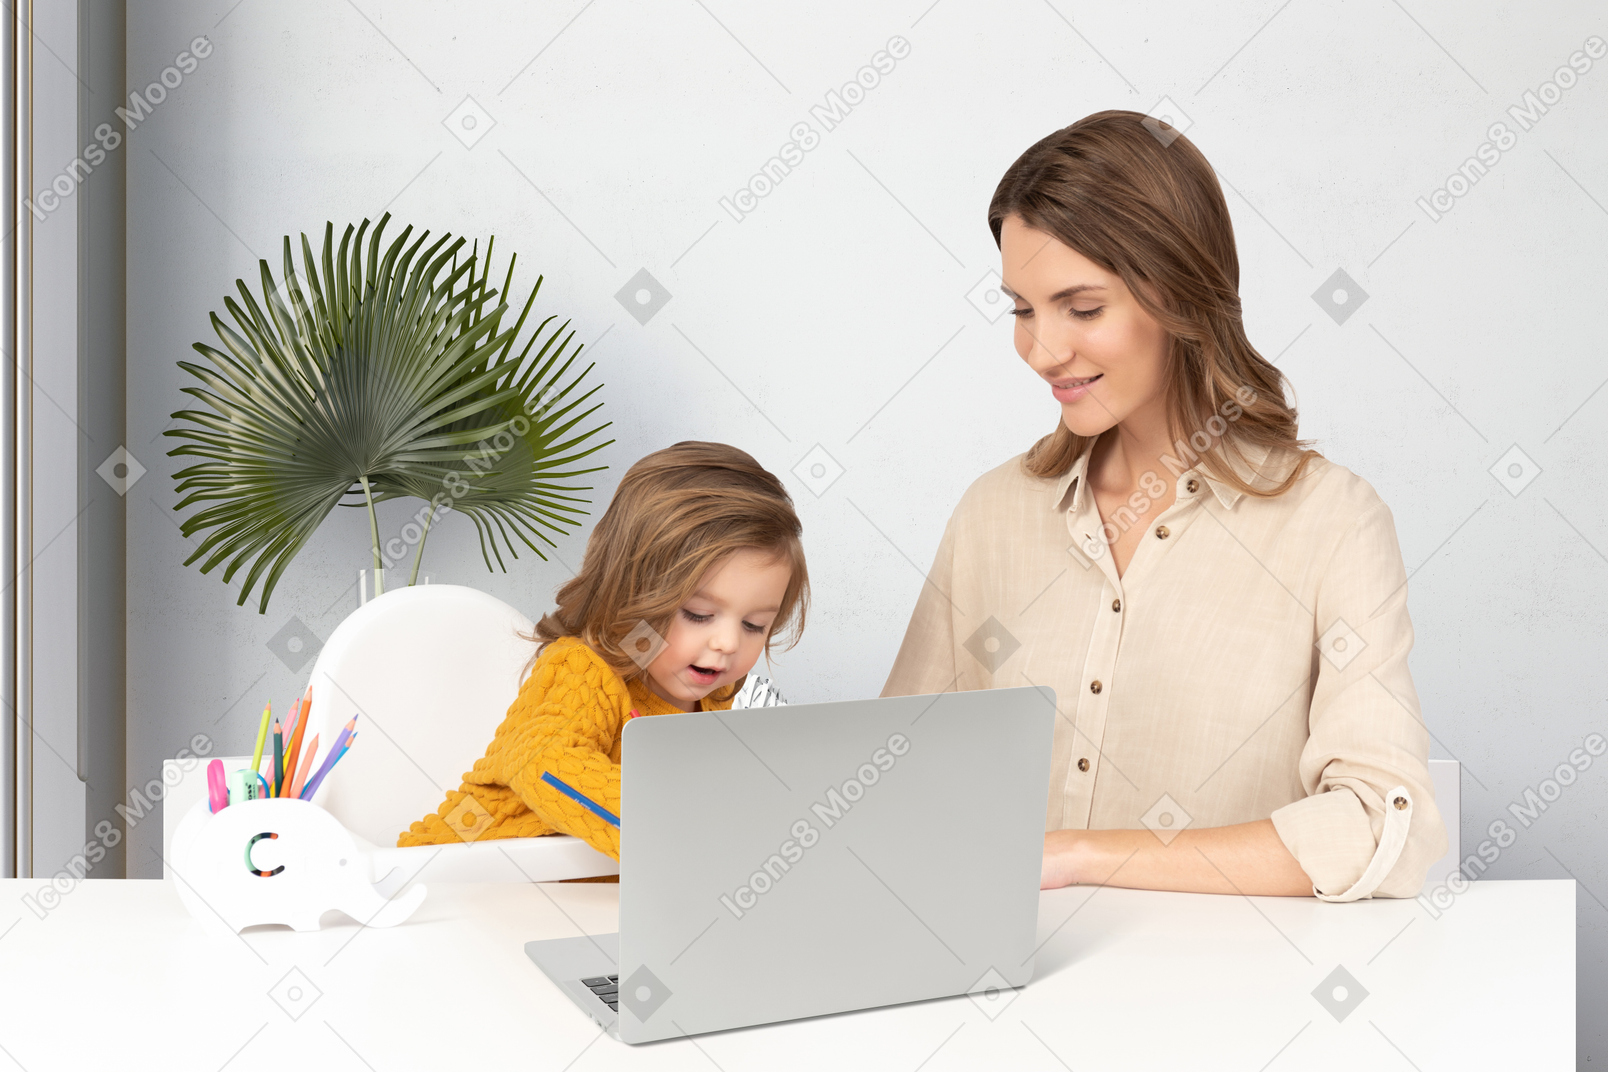 A woman and a little girl looking at a laptop